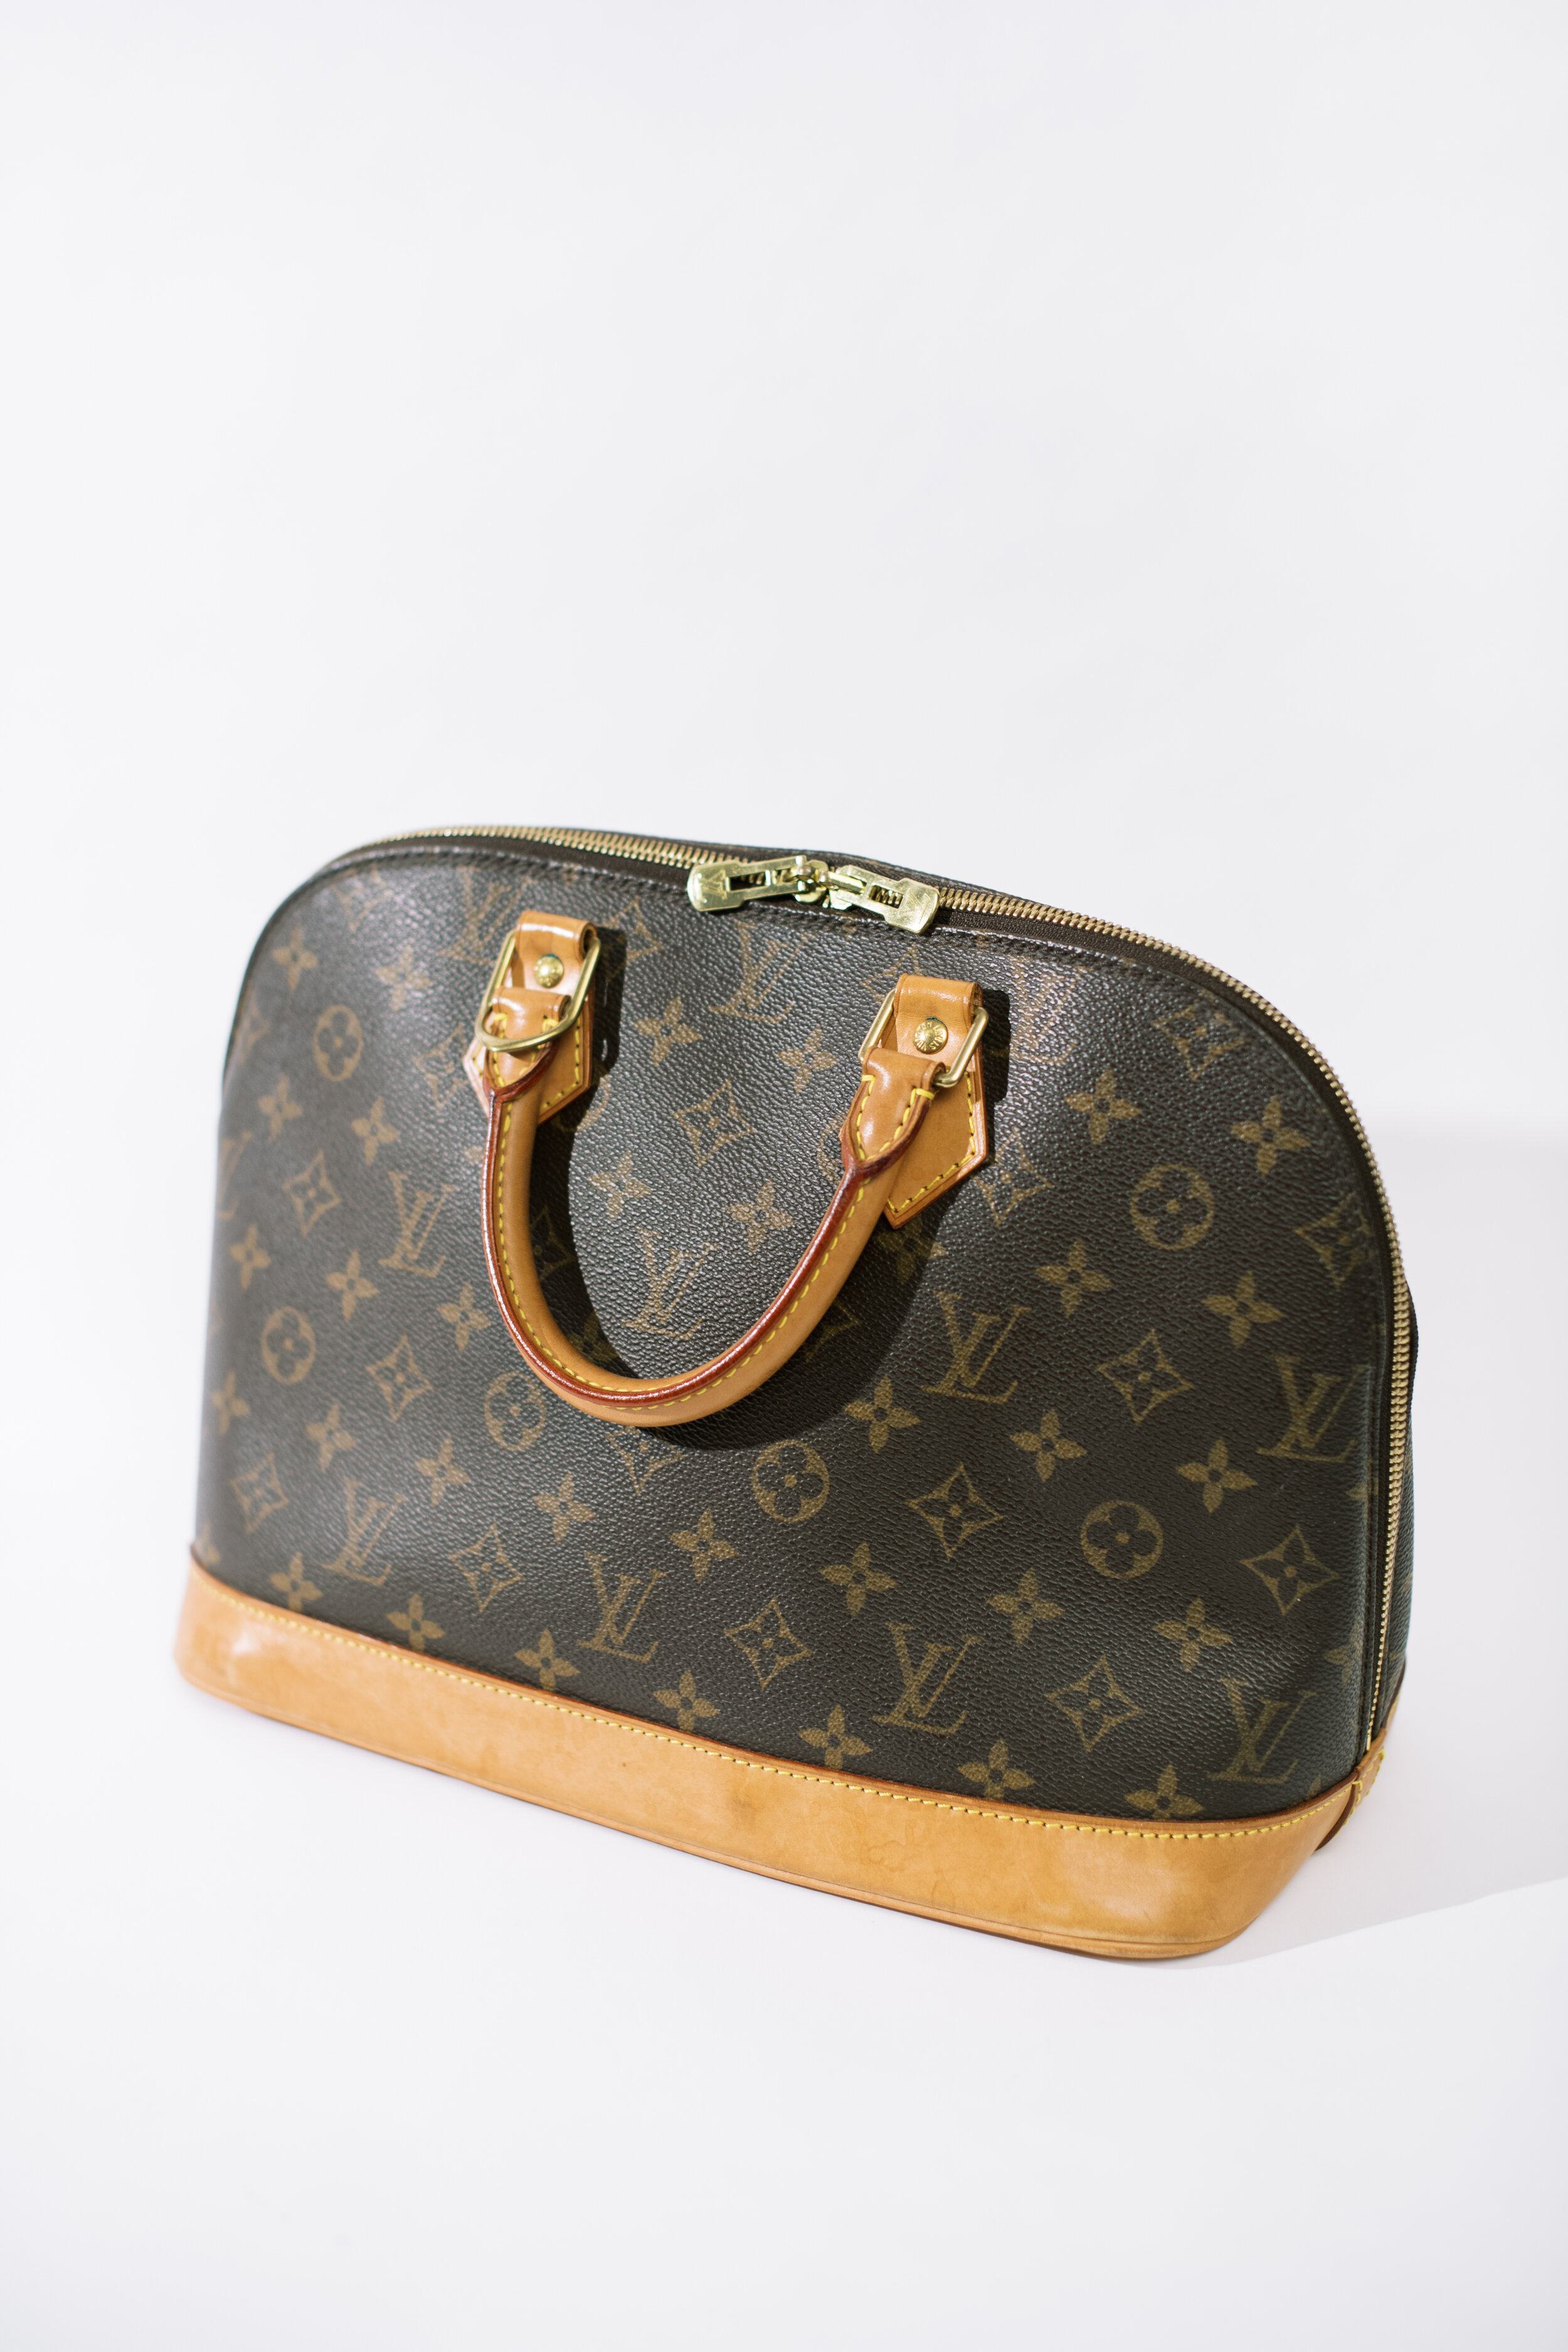 Louis Vuitton Suhali Le Fabuleux - Dress Raleigh Consignment